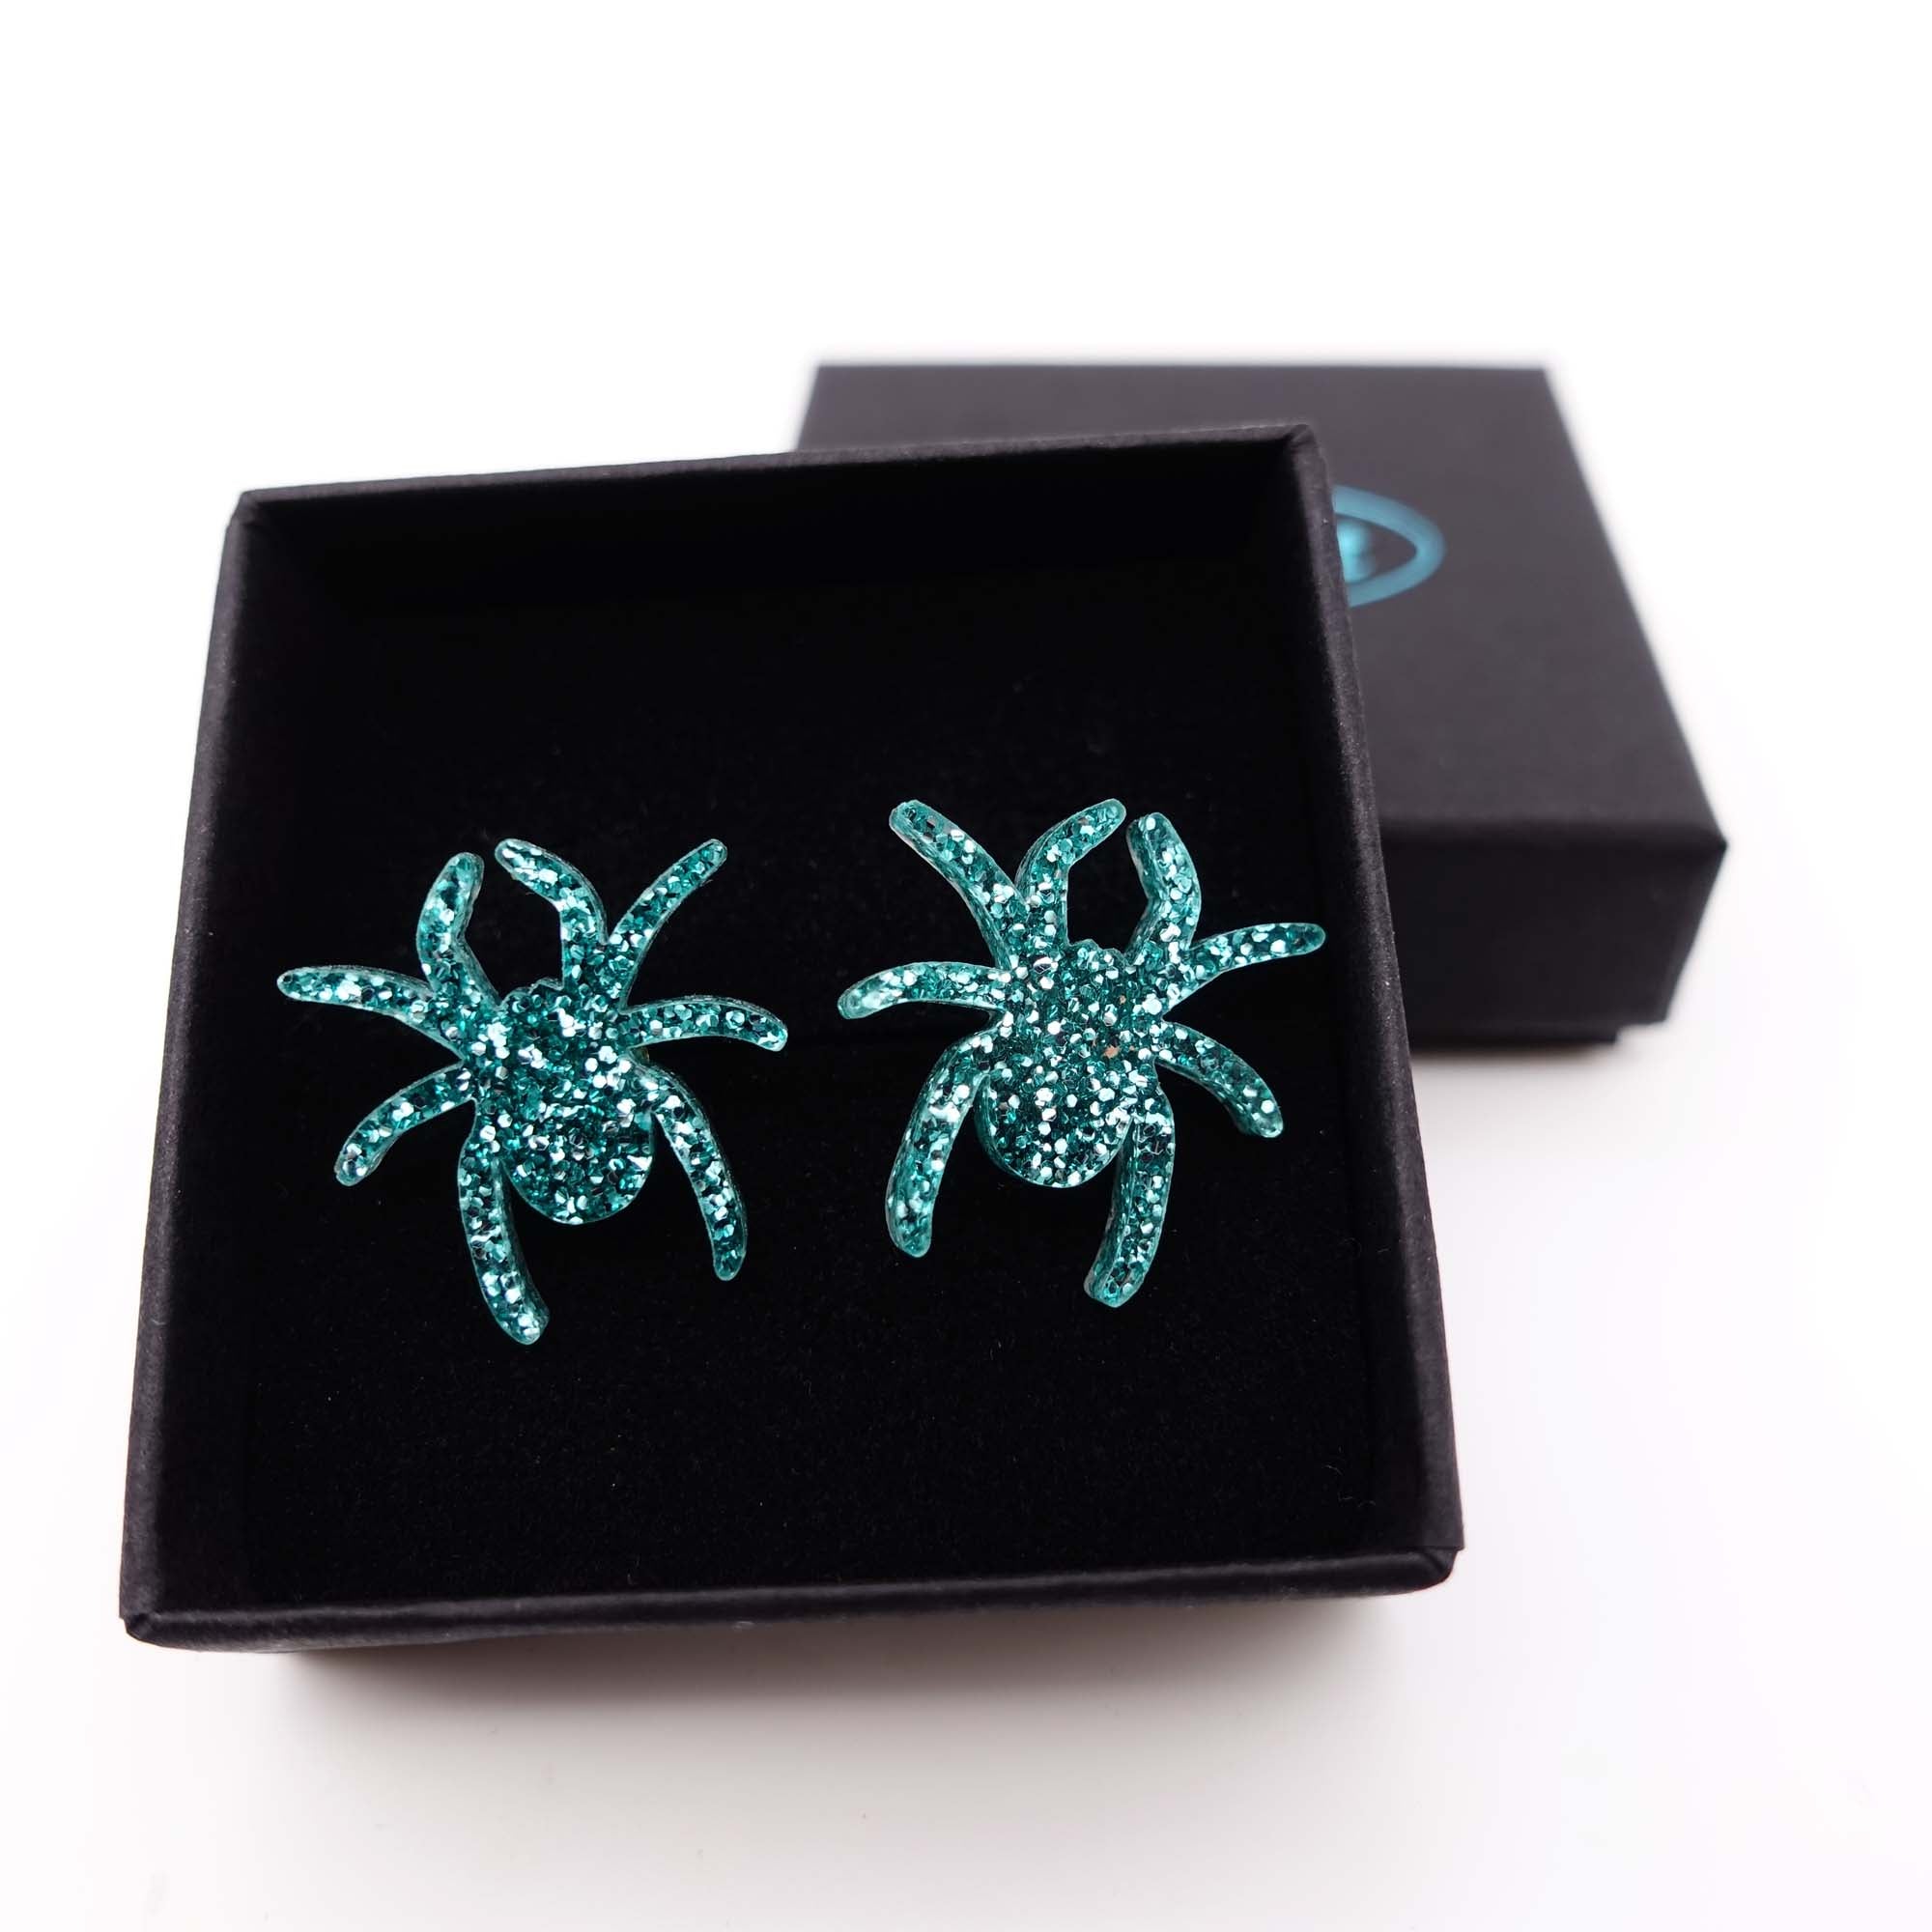 Teal glitter Lady Hale spider stud earrings by Wear and Resist. 